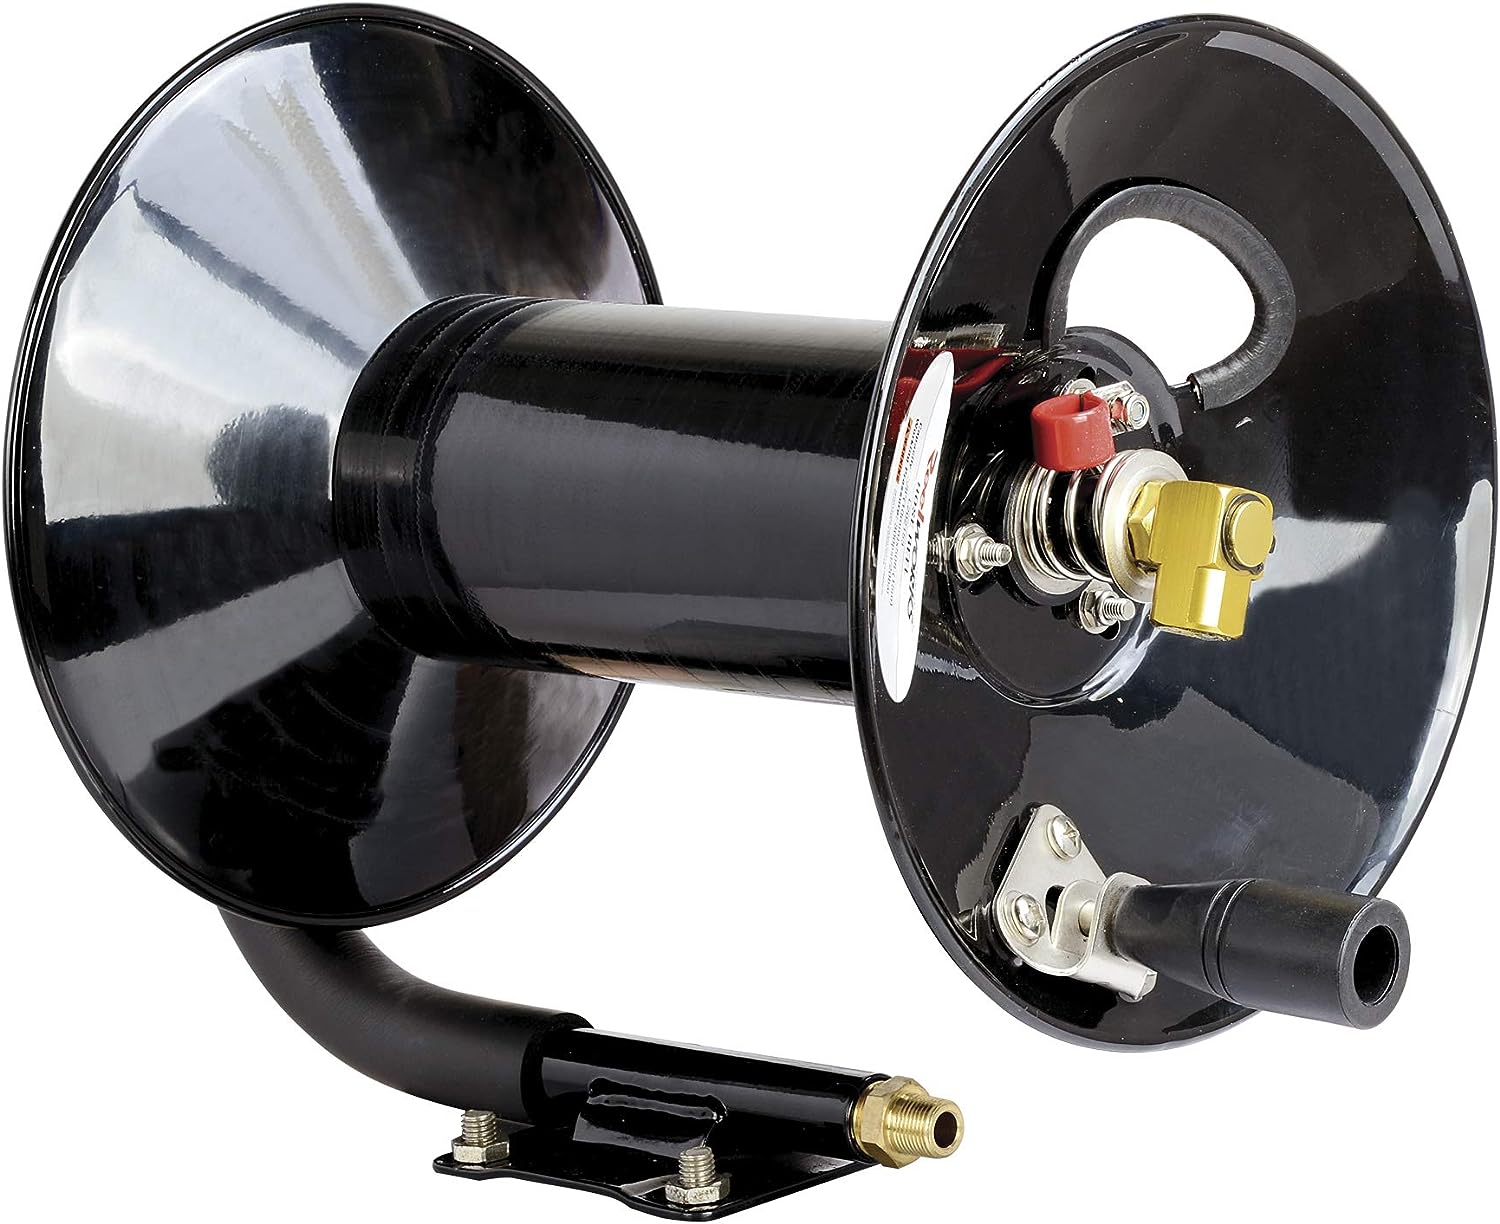 Goodyear Industrial Retractable Air Hose Reel- 1/2in x 65ft, 300 PSI Max, 3/8 in NPT Connections, Single Arm